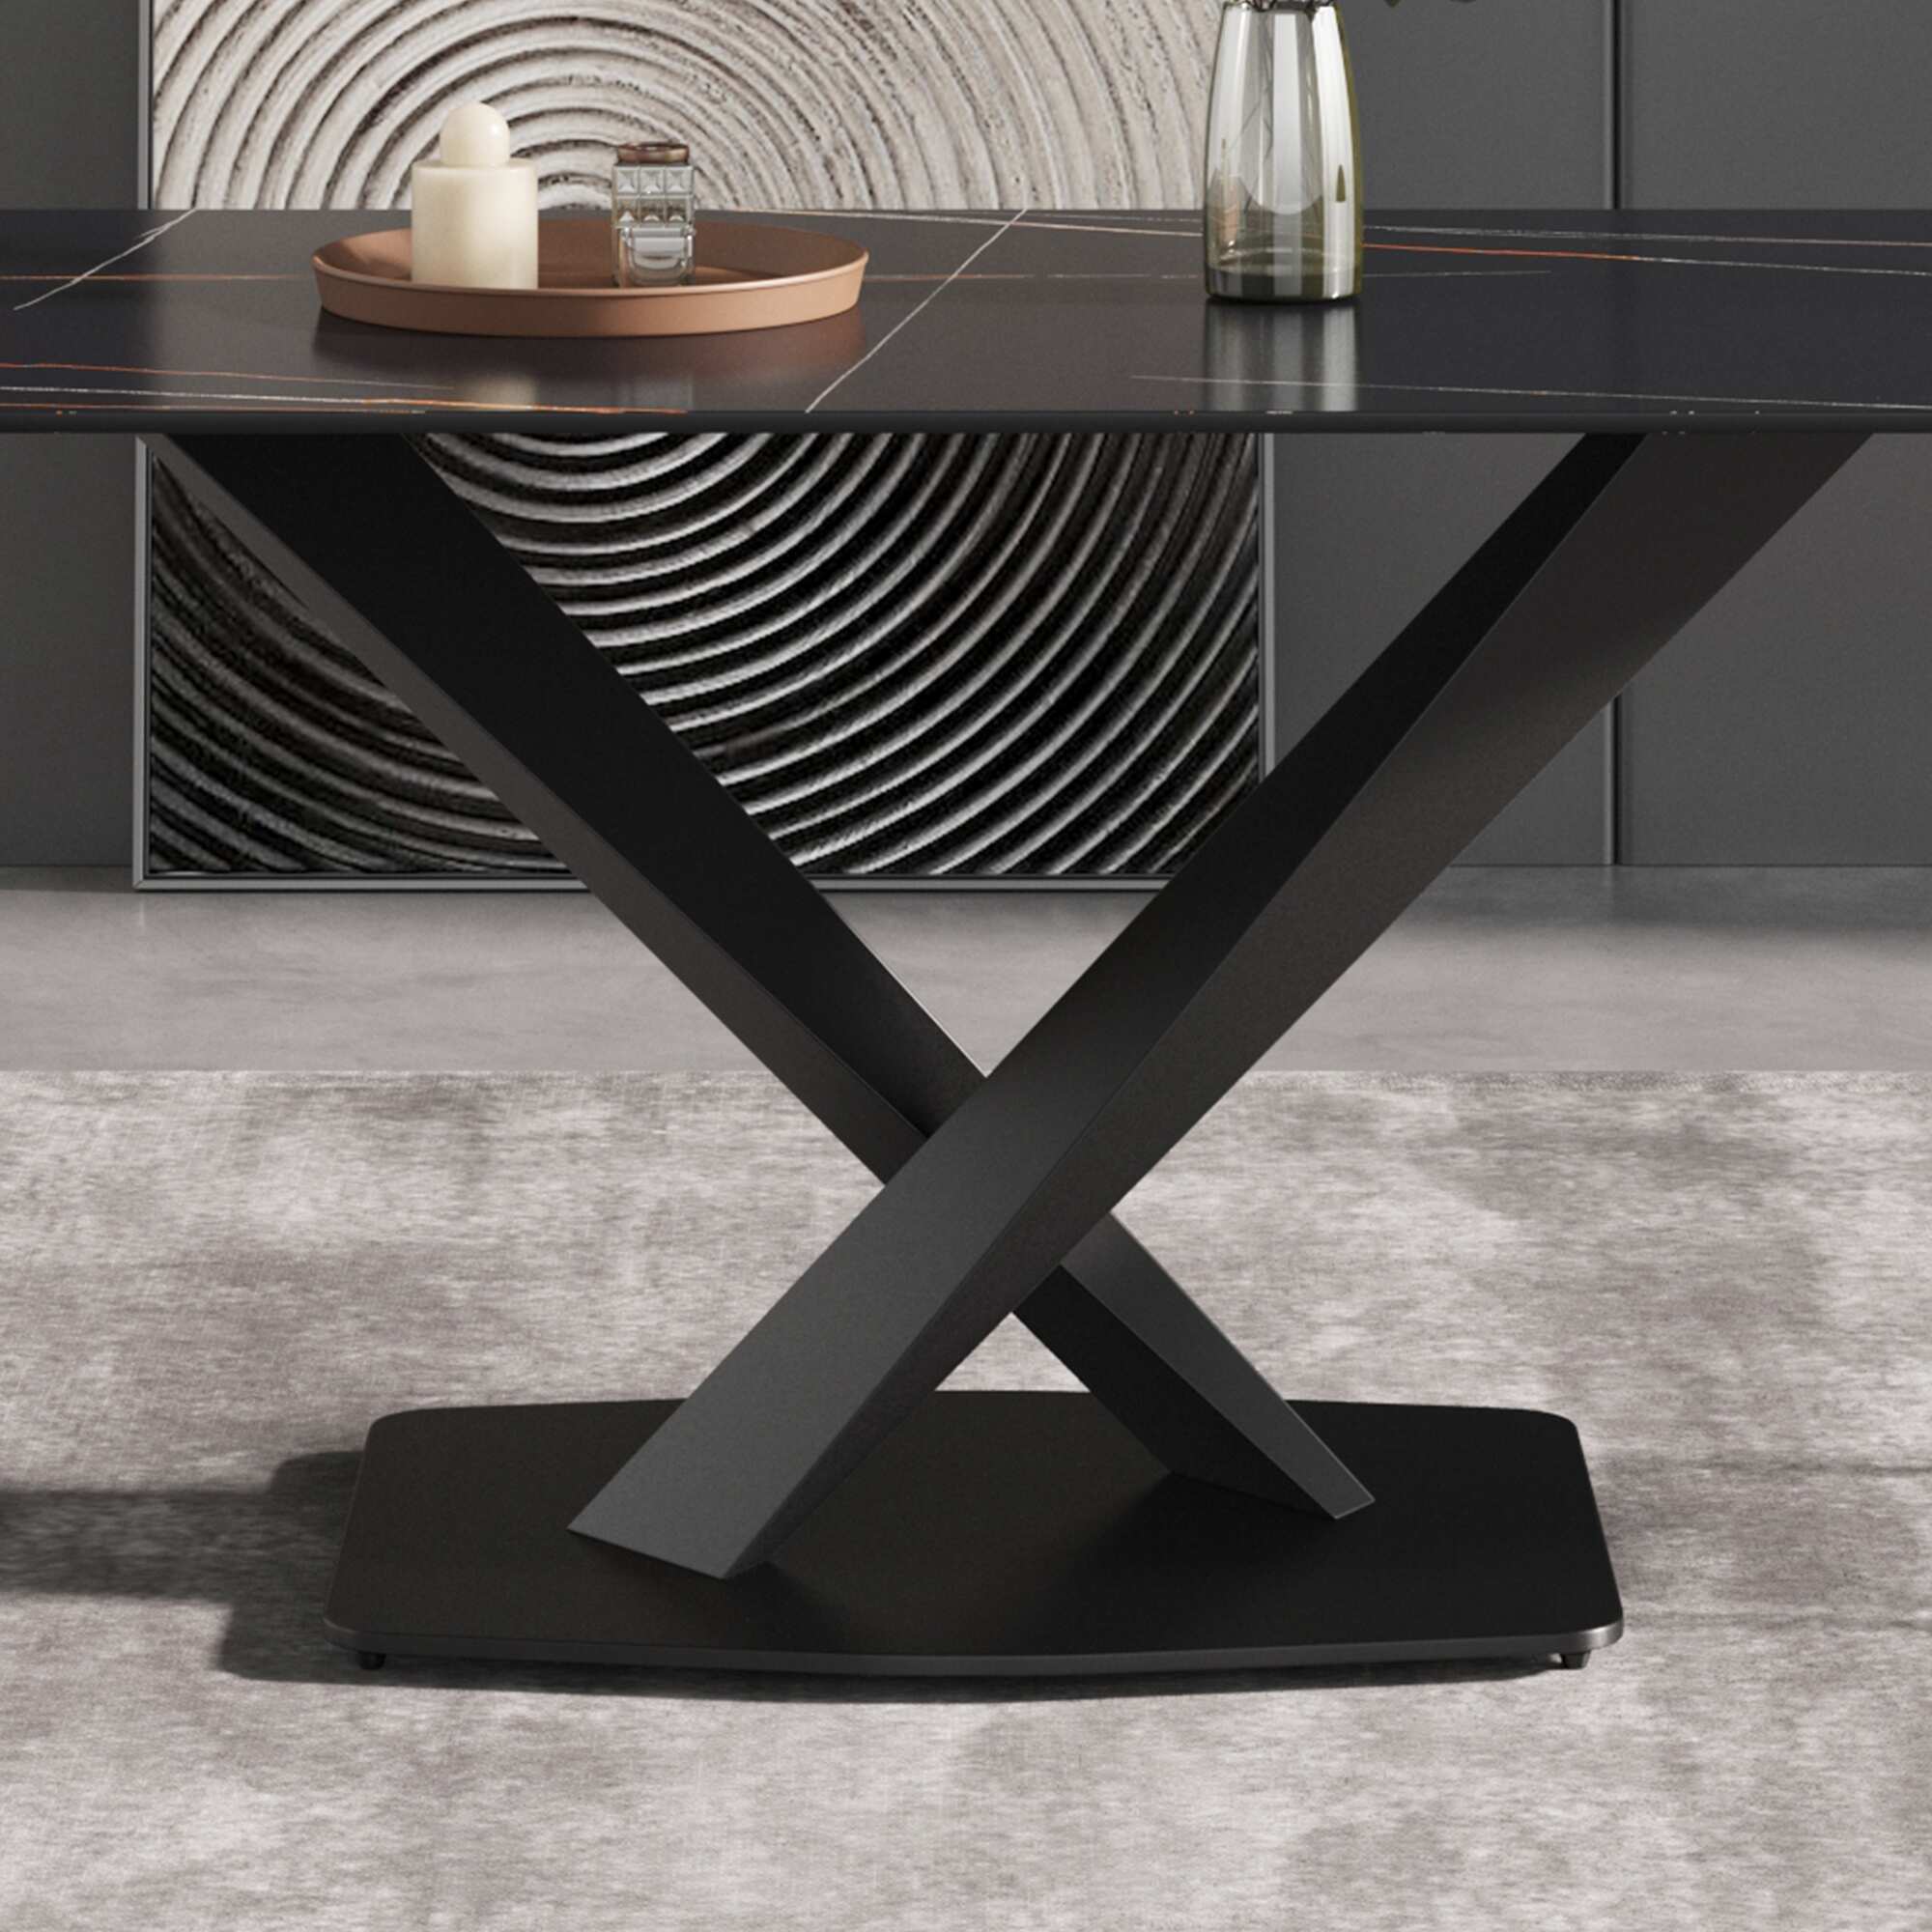 63" Modern Dining Table with Artificial Stone Top and Metal X-leg